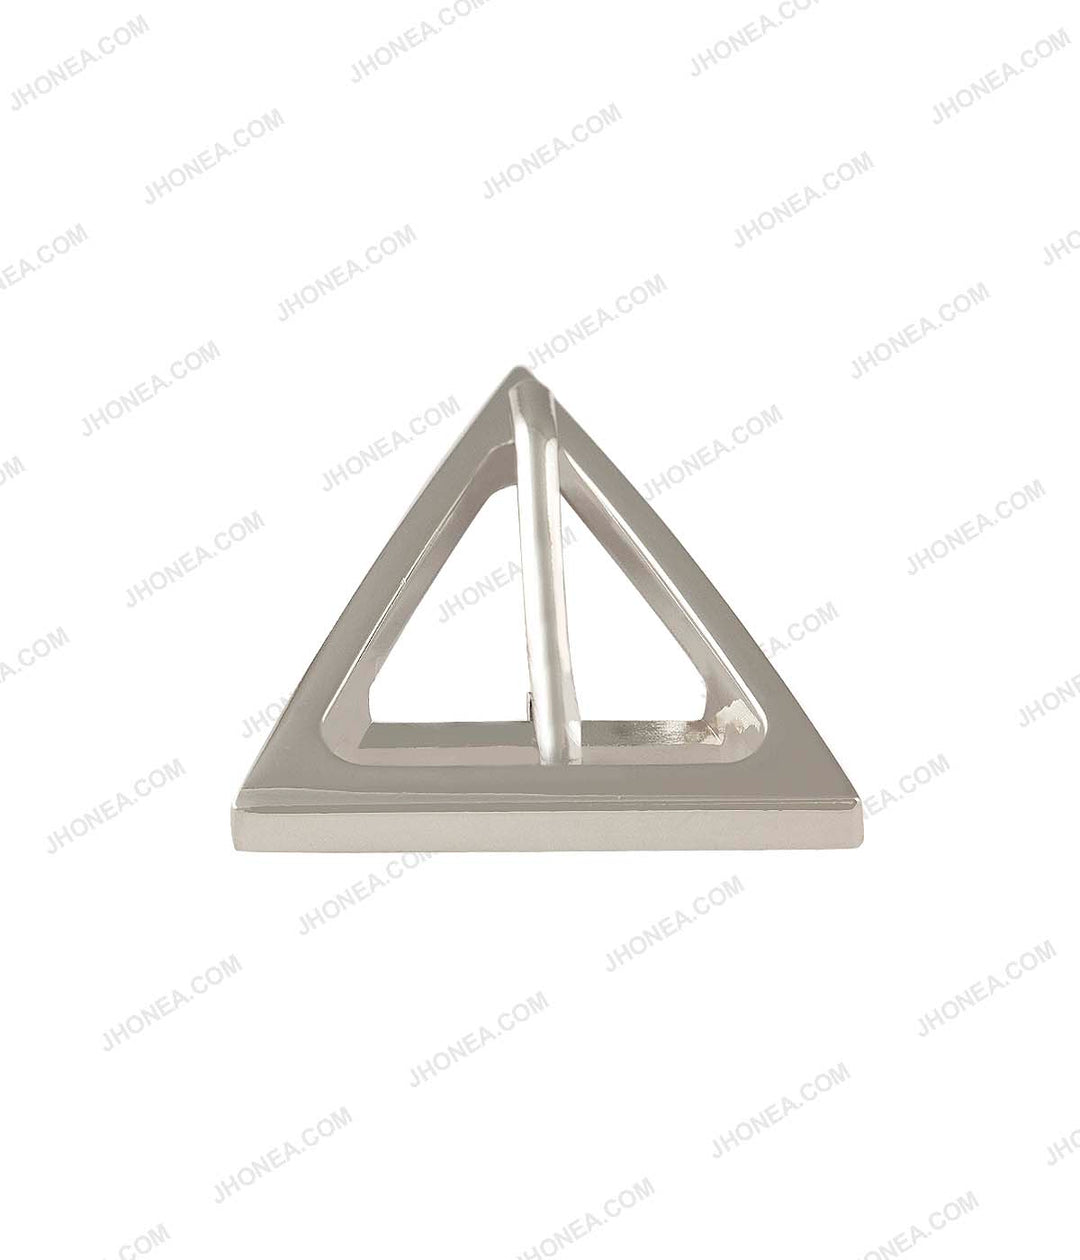 Triangle Geometric Structure Prong Belt Buckle for Western Dresses